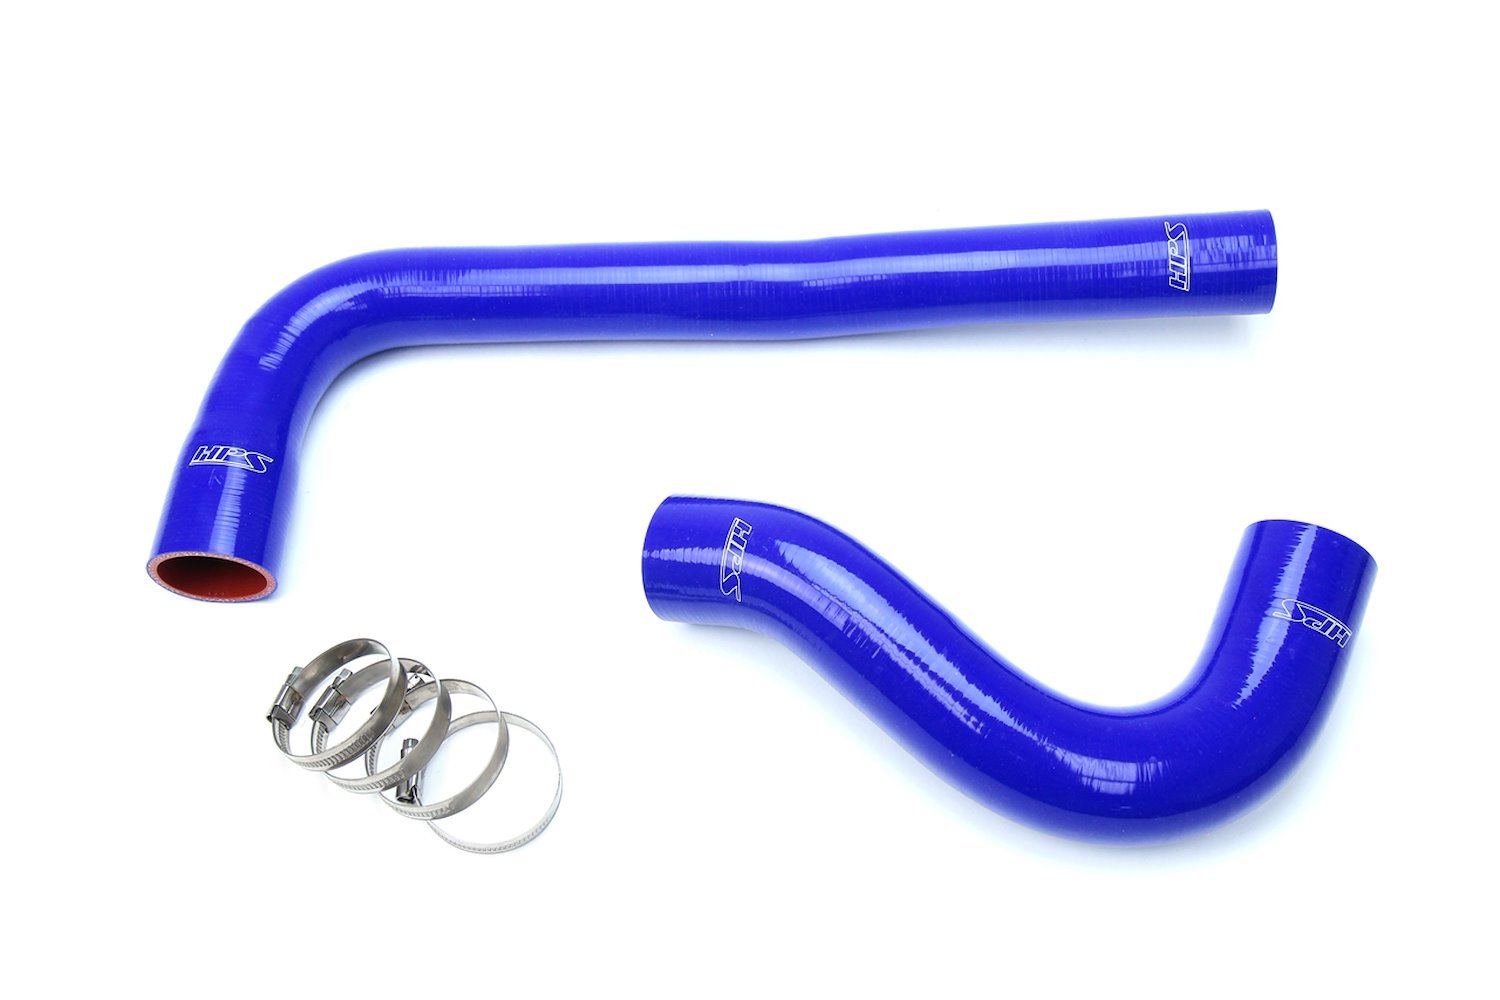 57-1322-BLUE Radiator Hose Kit, High-Temp 3-Ply Reinforced Silicone, Replace OEM Rubber Radiator Coolant Hoses